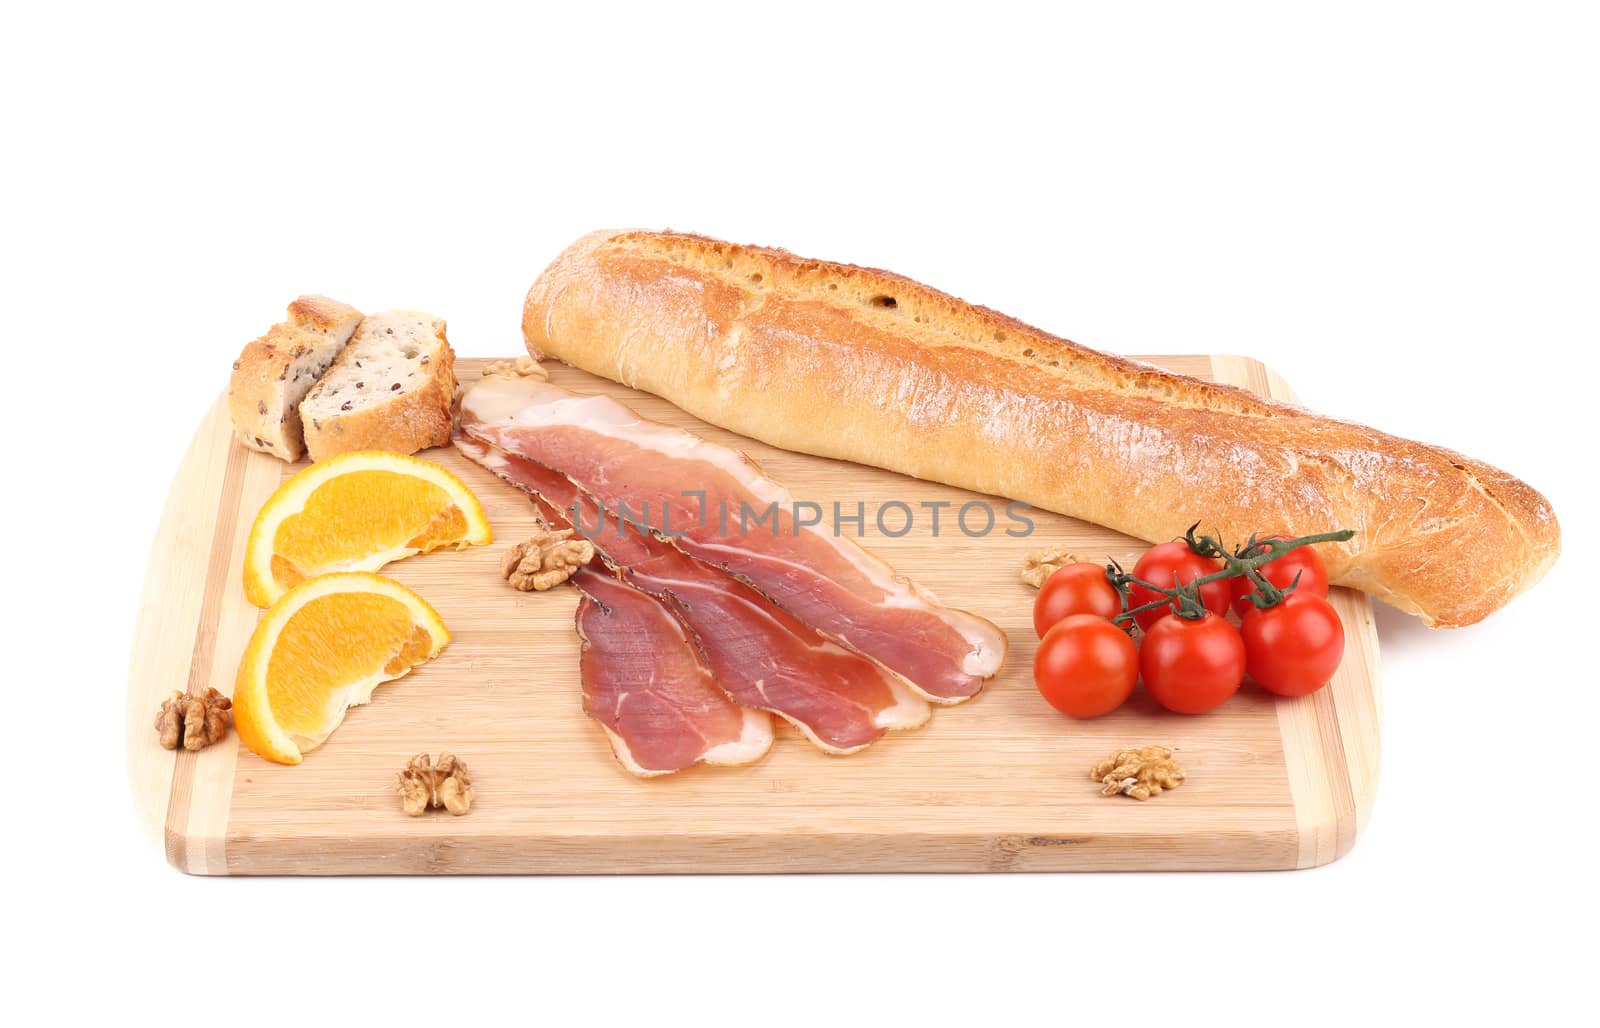 Prosciutto with cherry tomatoes and walnuts. Isolated on a white background.